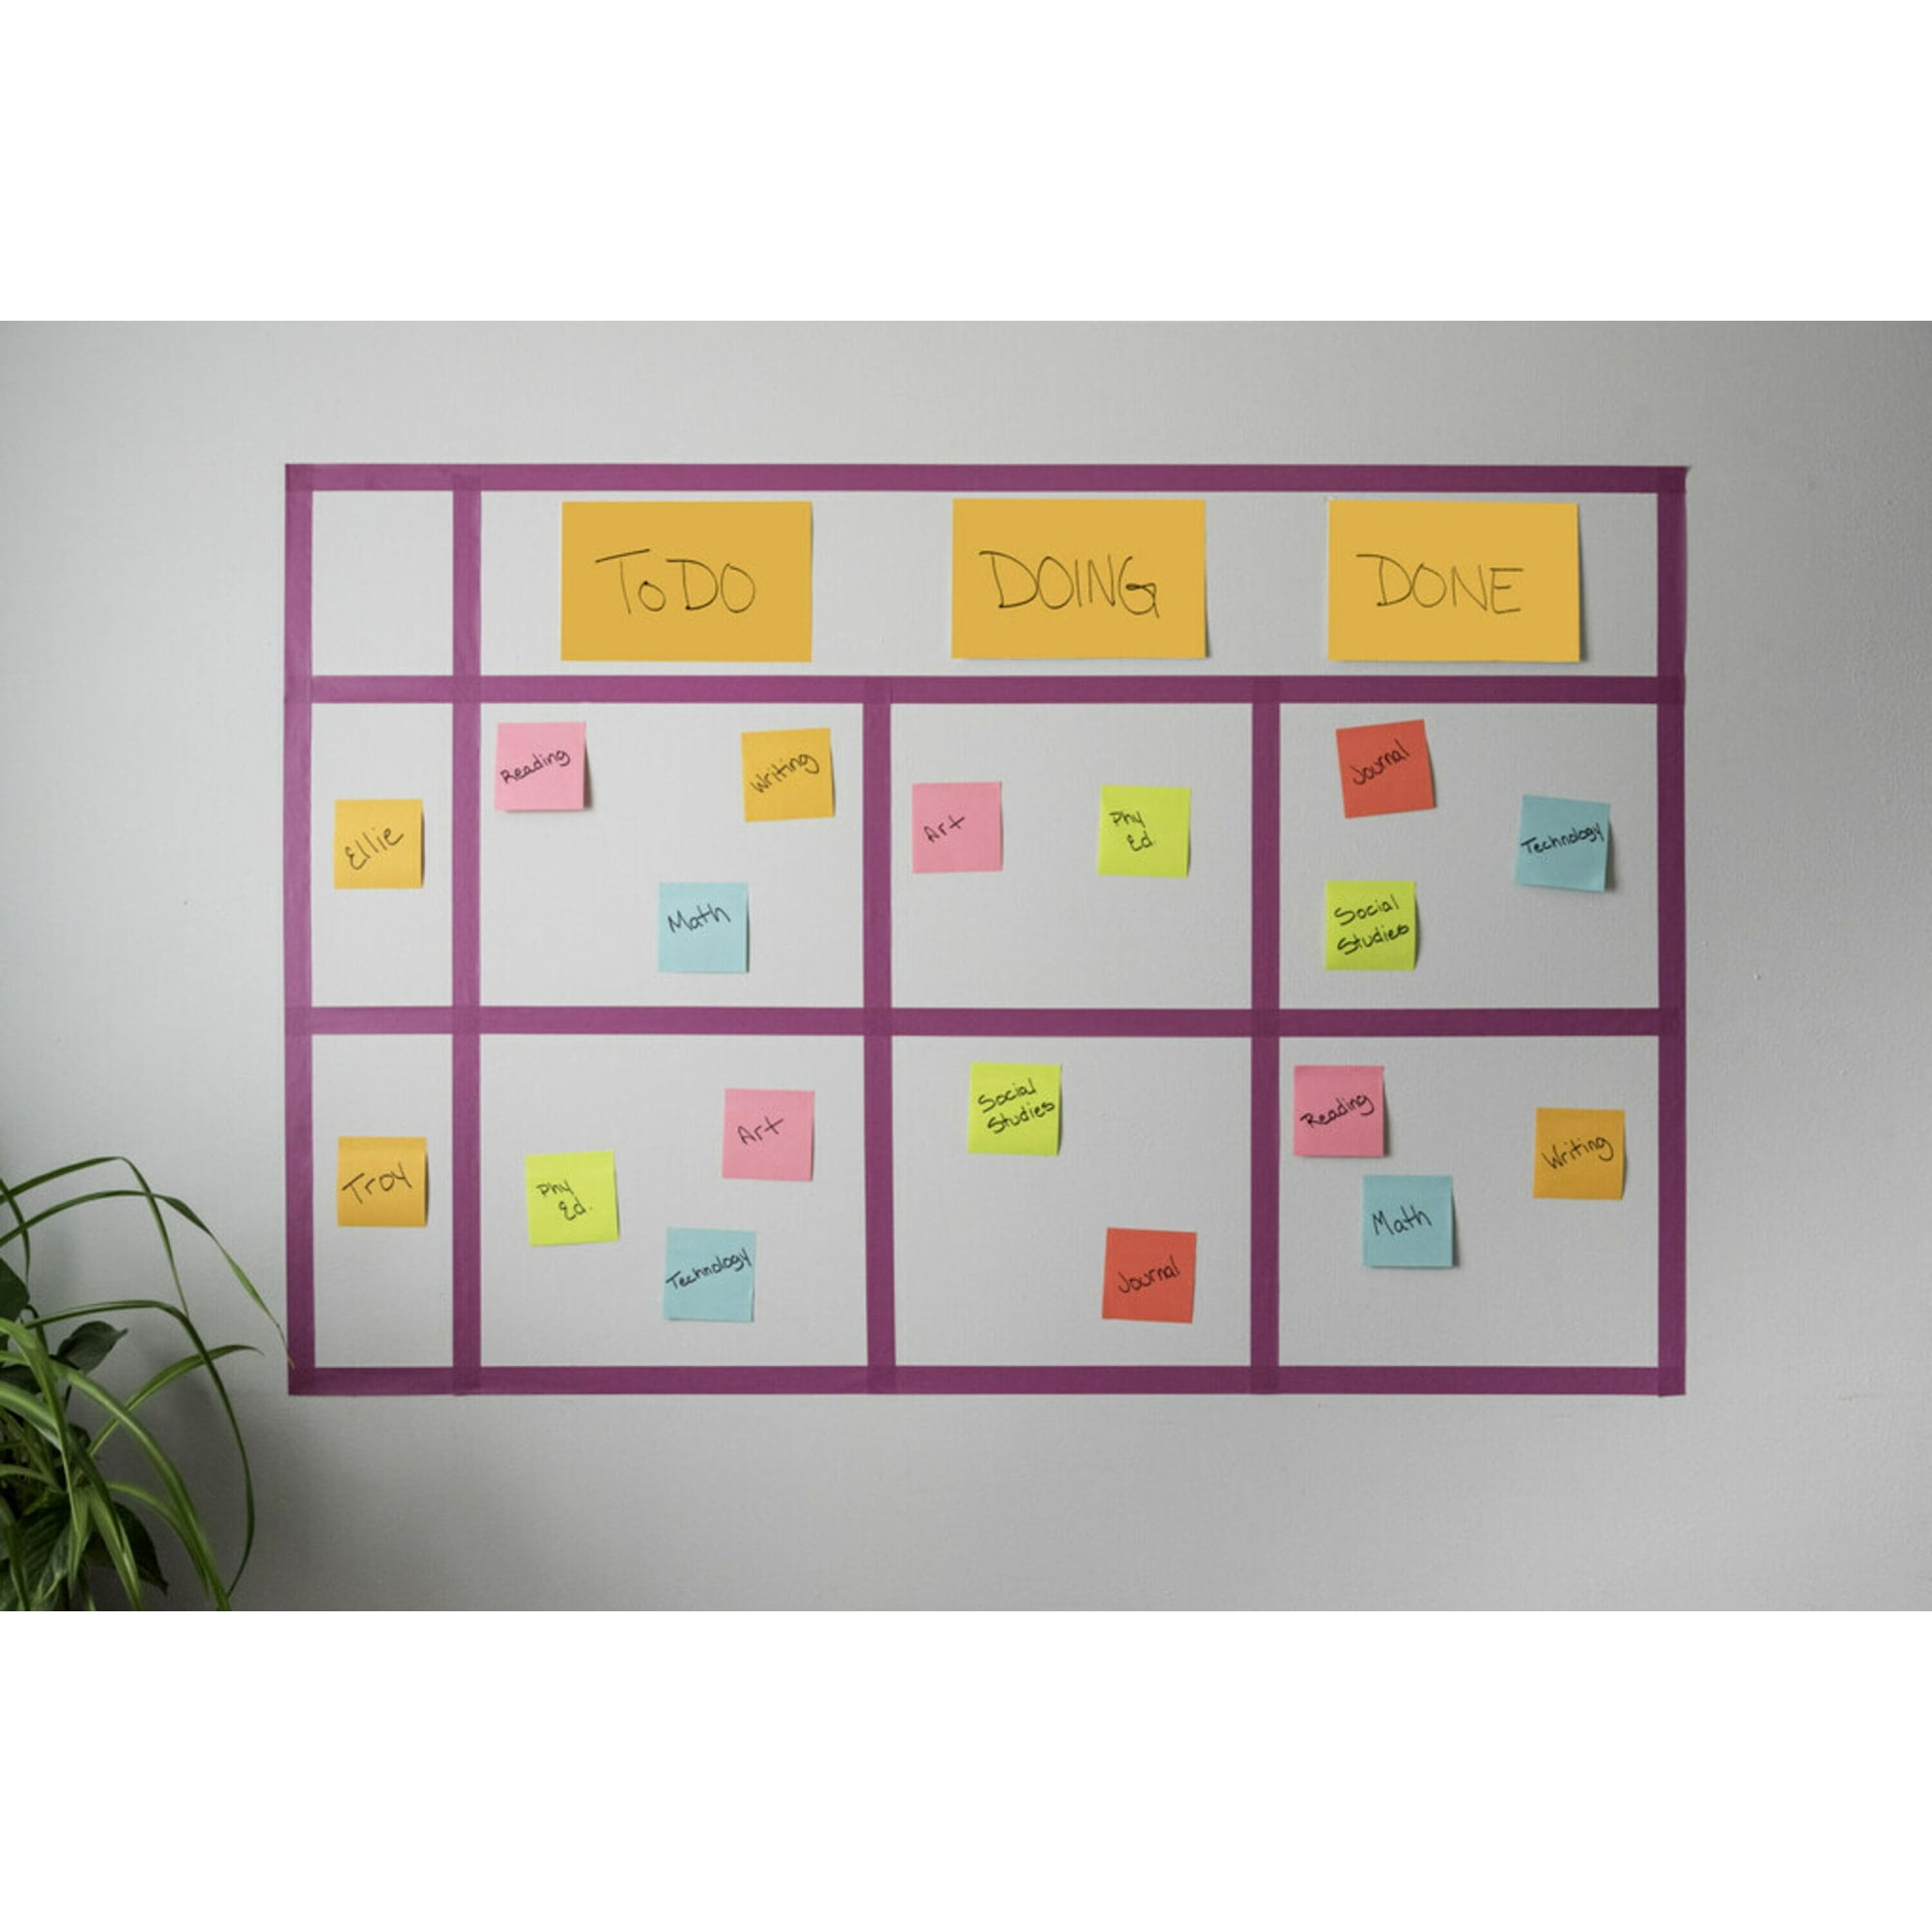 Post-it Super Sticky Notes, 3 x 3, Assorted Colors, 90 Sheets per Pad, Pack of 12 Pads